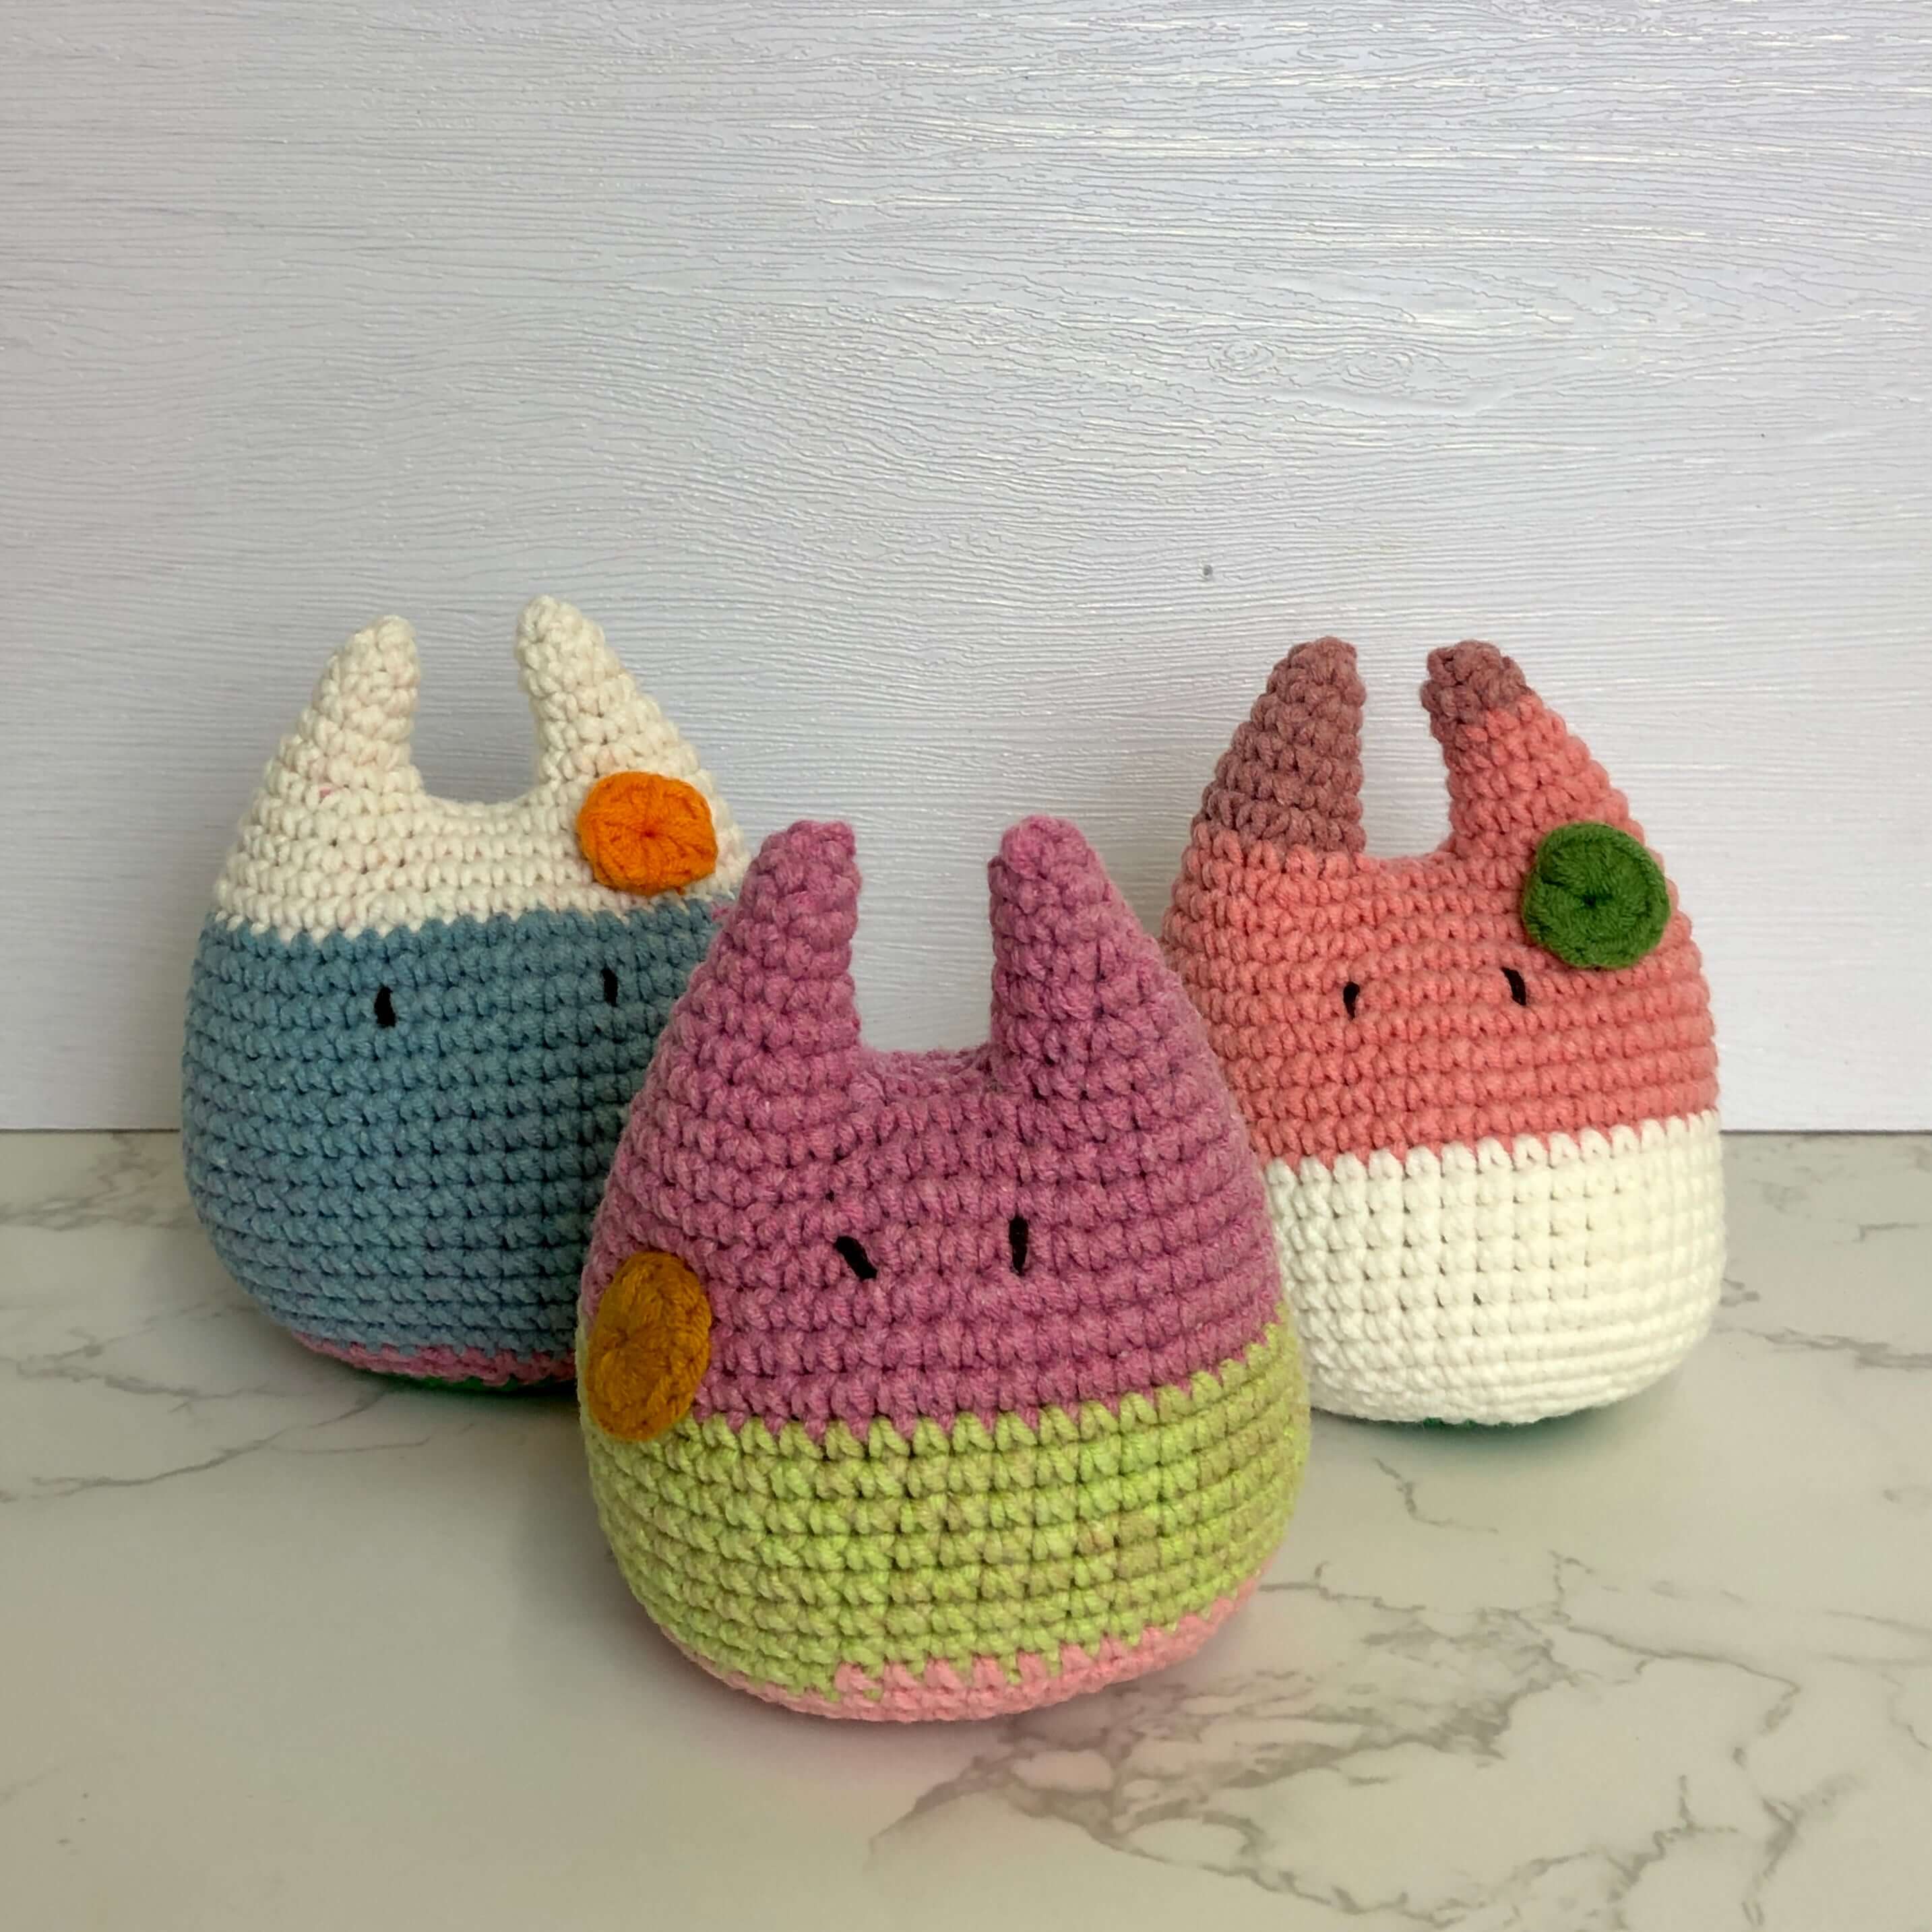 Handknitted Aroma Calming Creatures - Assorted patterns - 1pcs